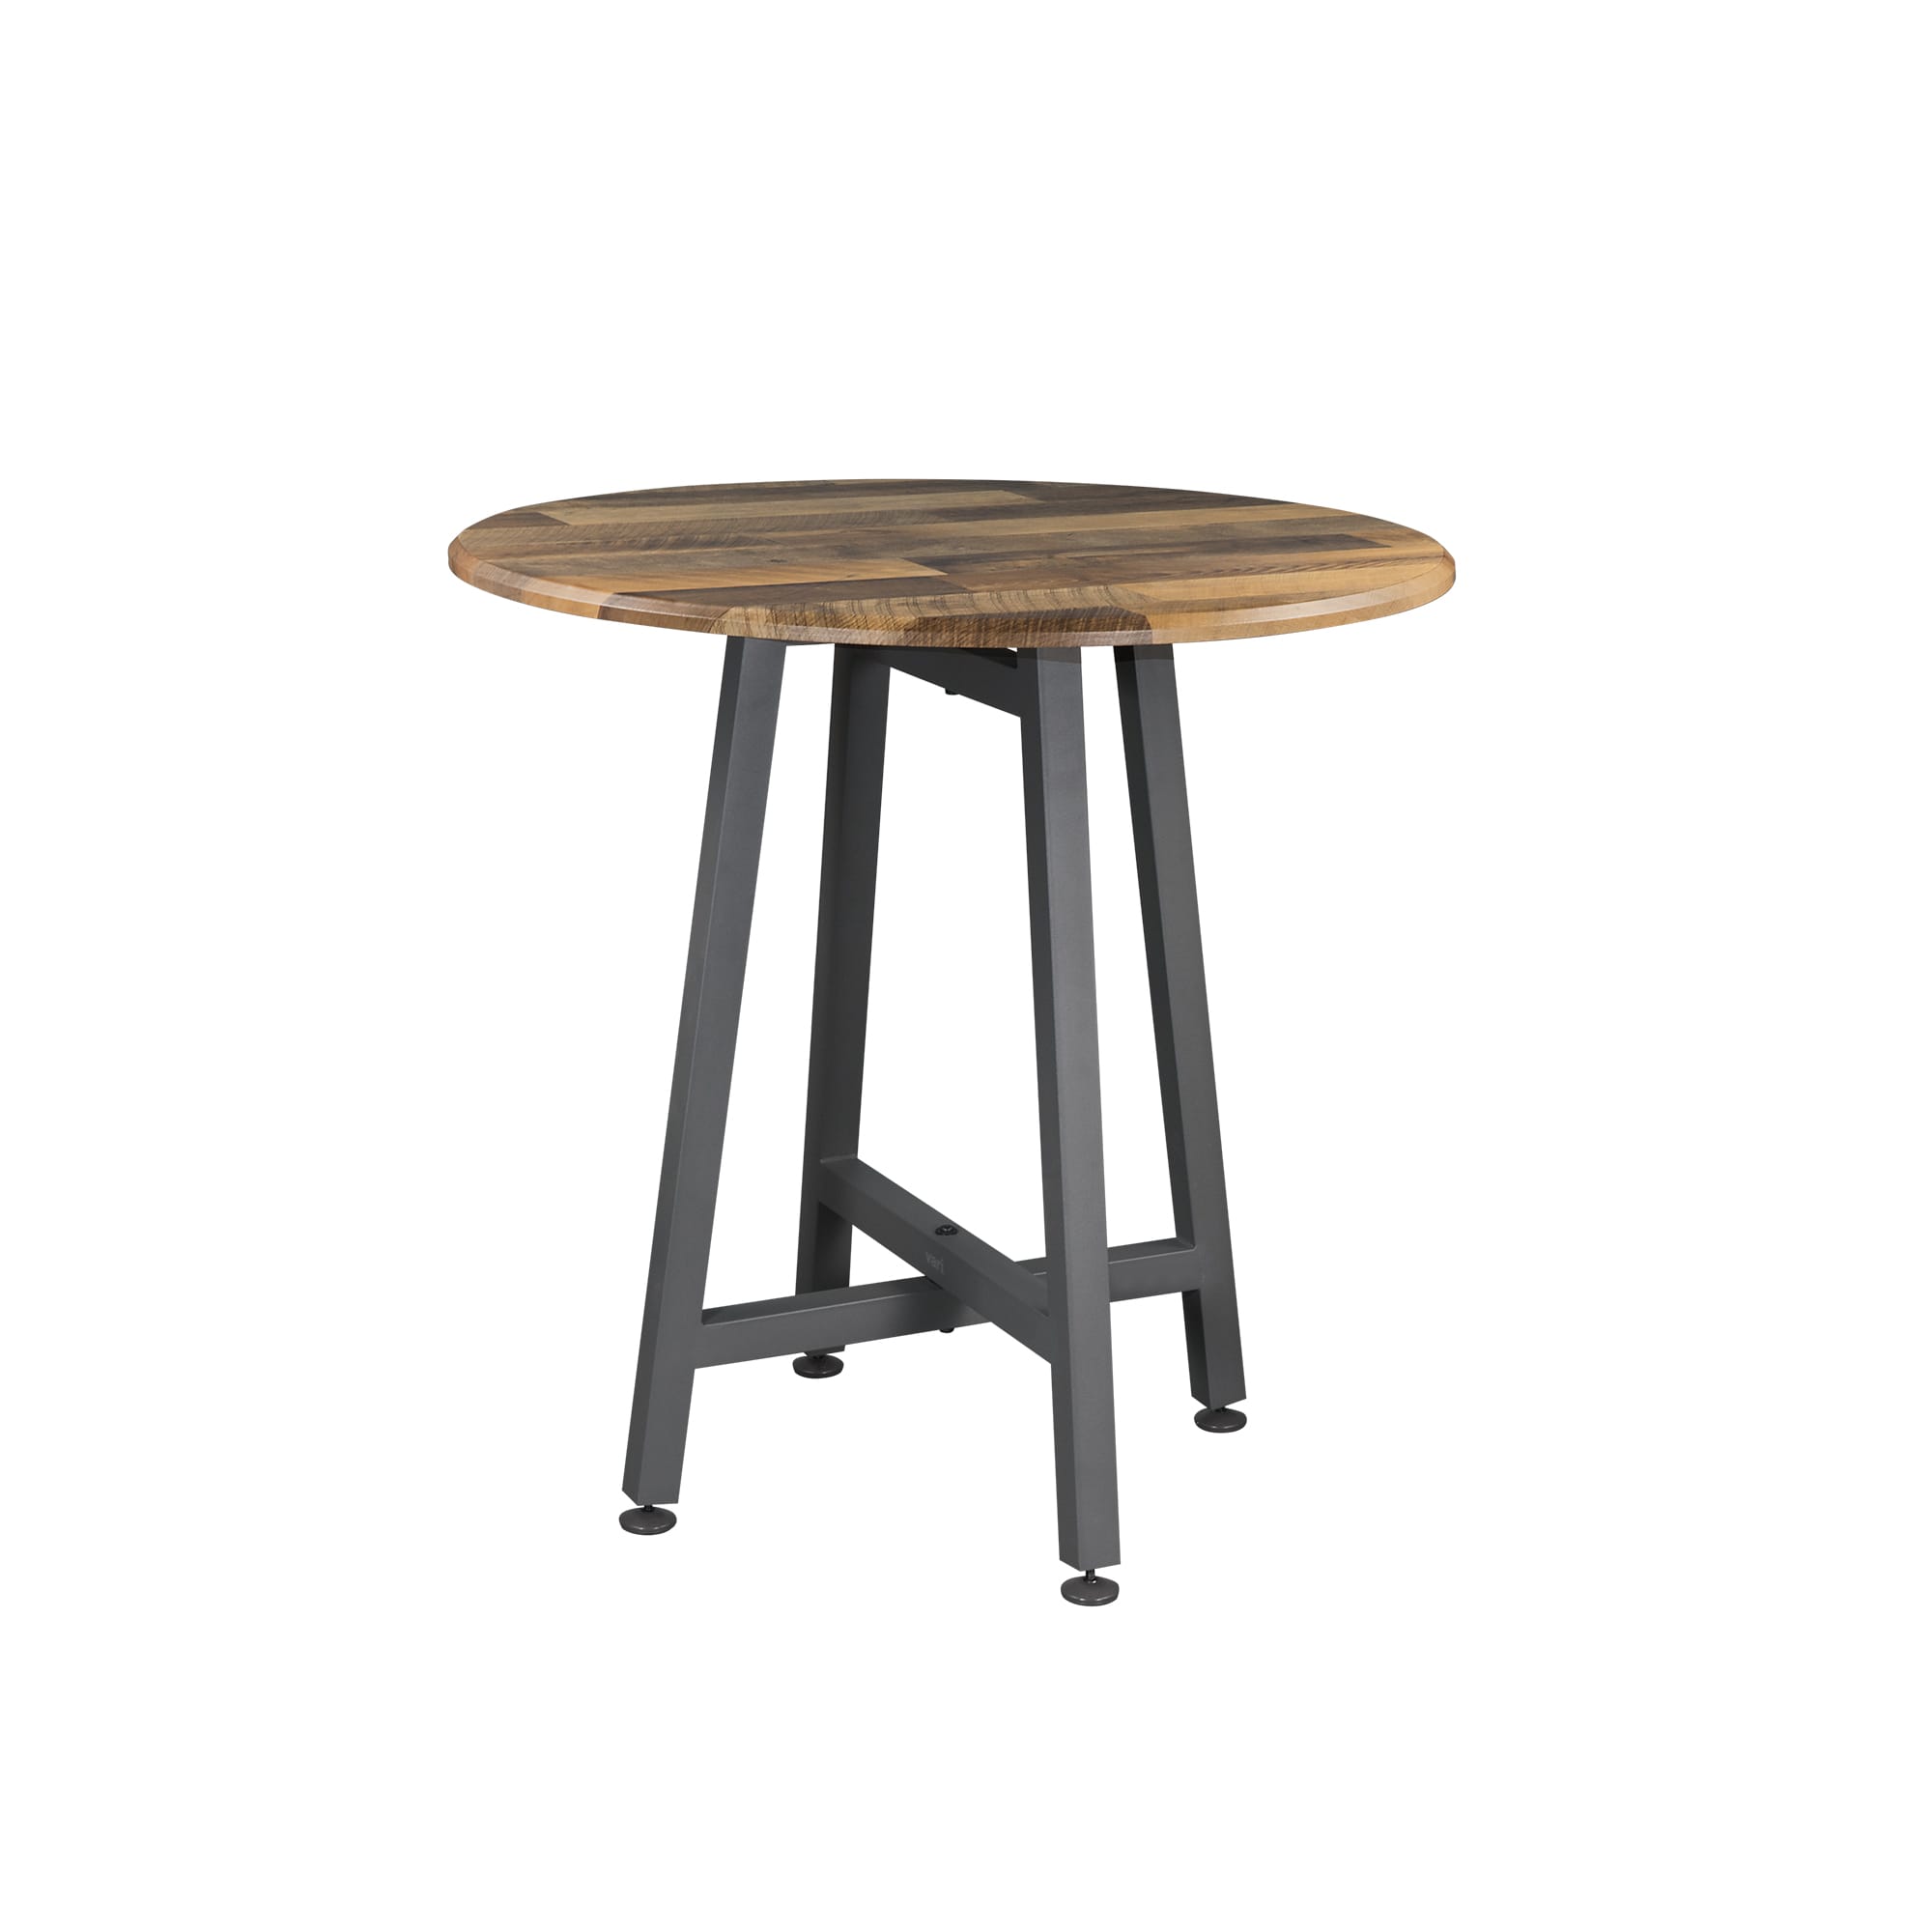 Standing Round Table Reclaimed Wood